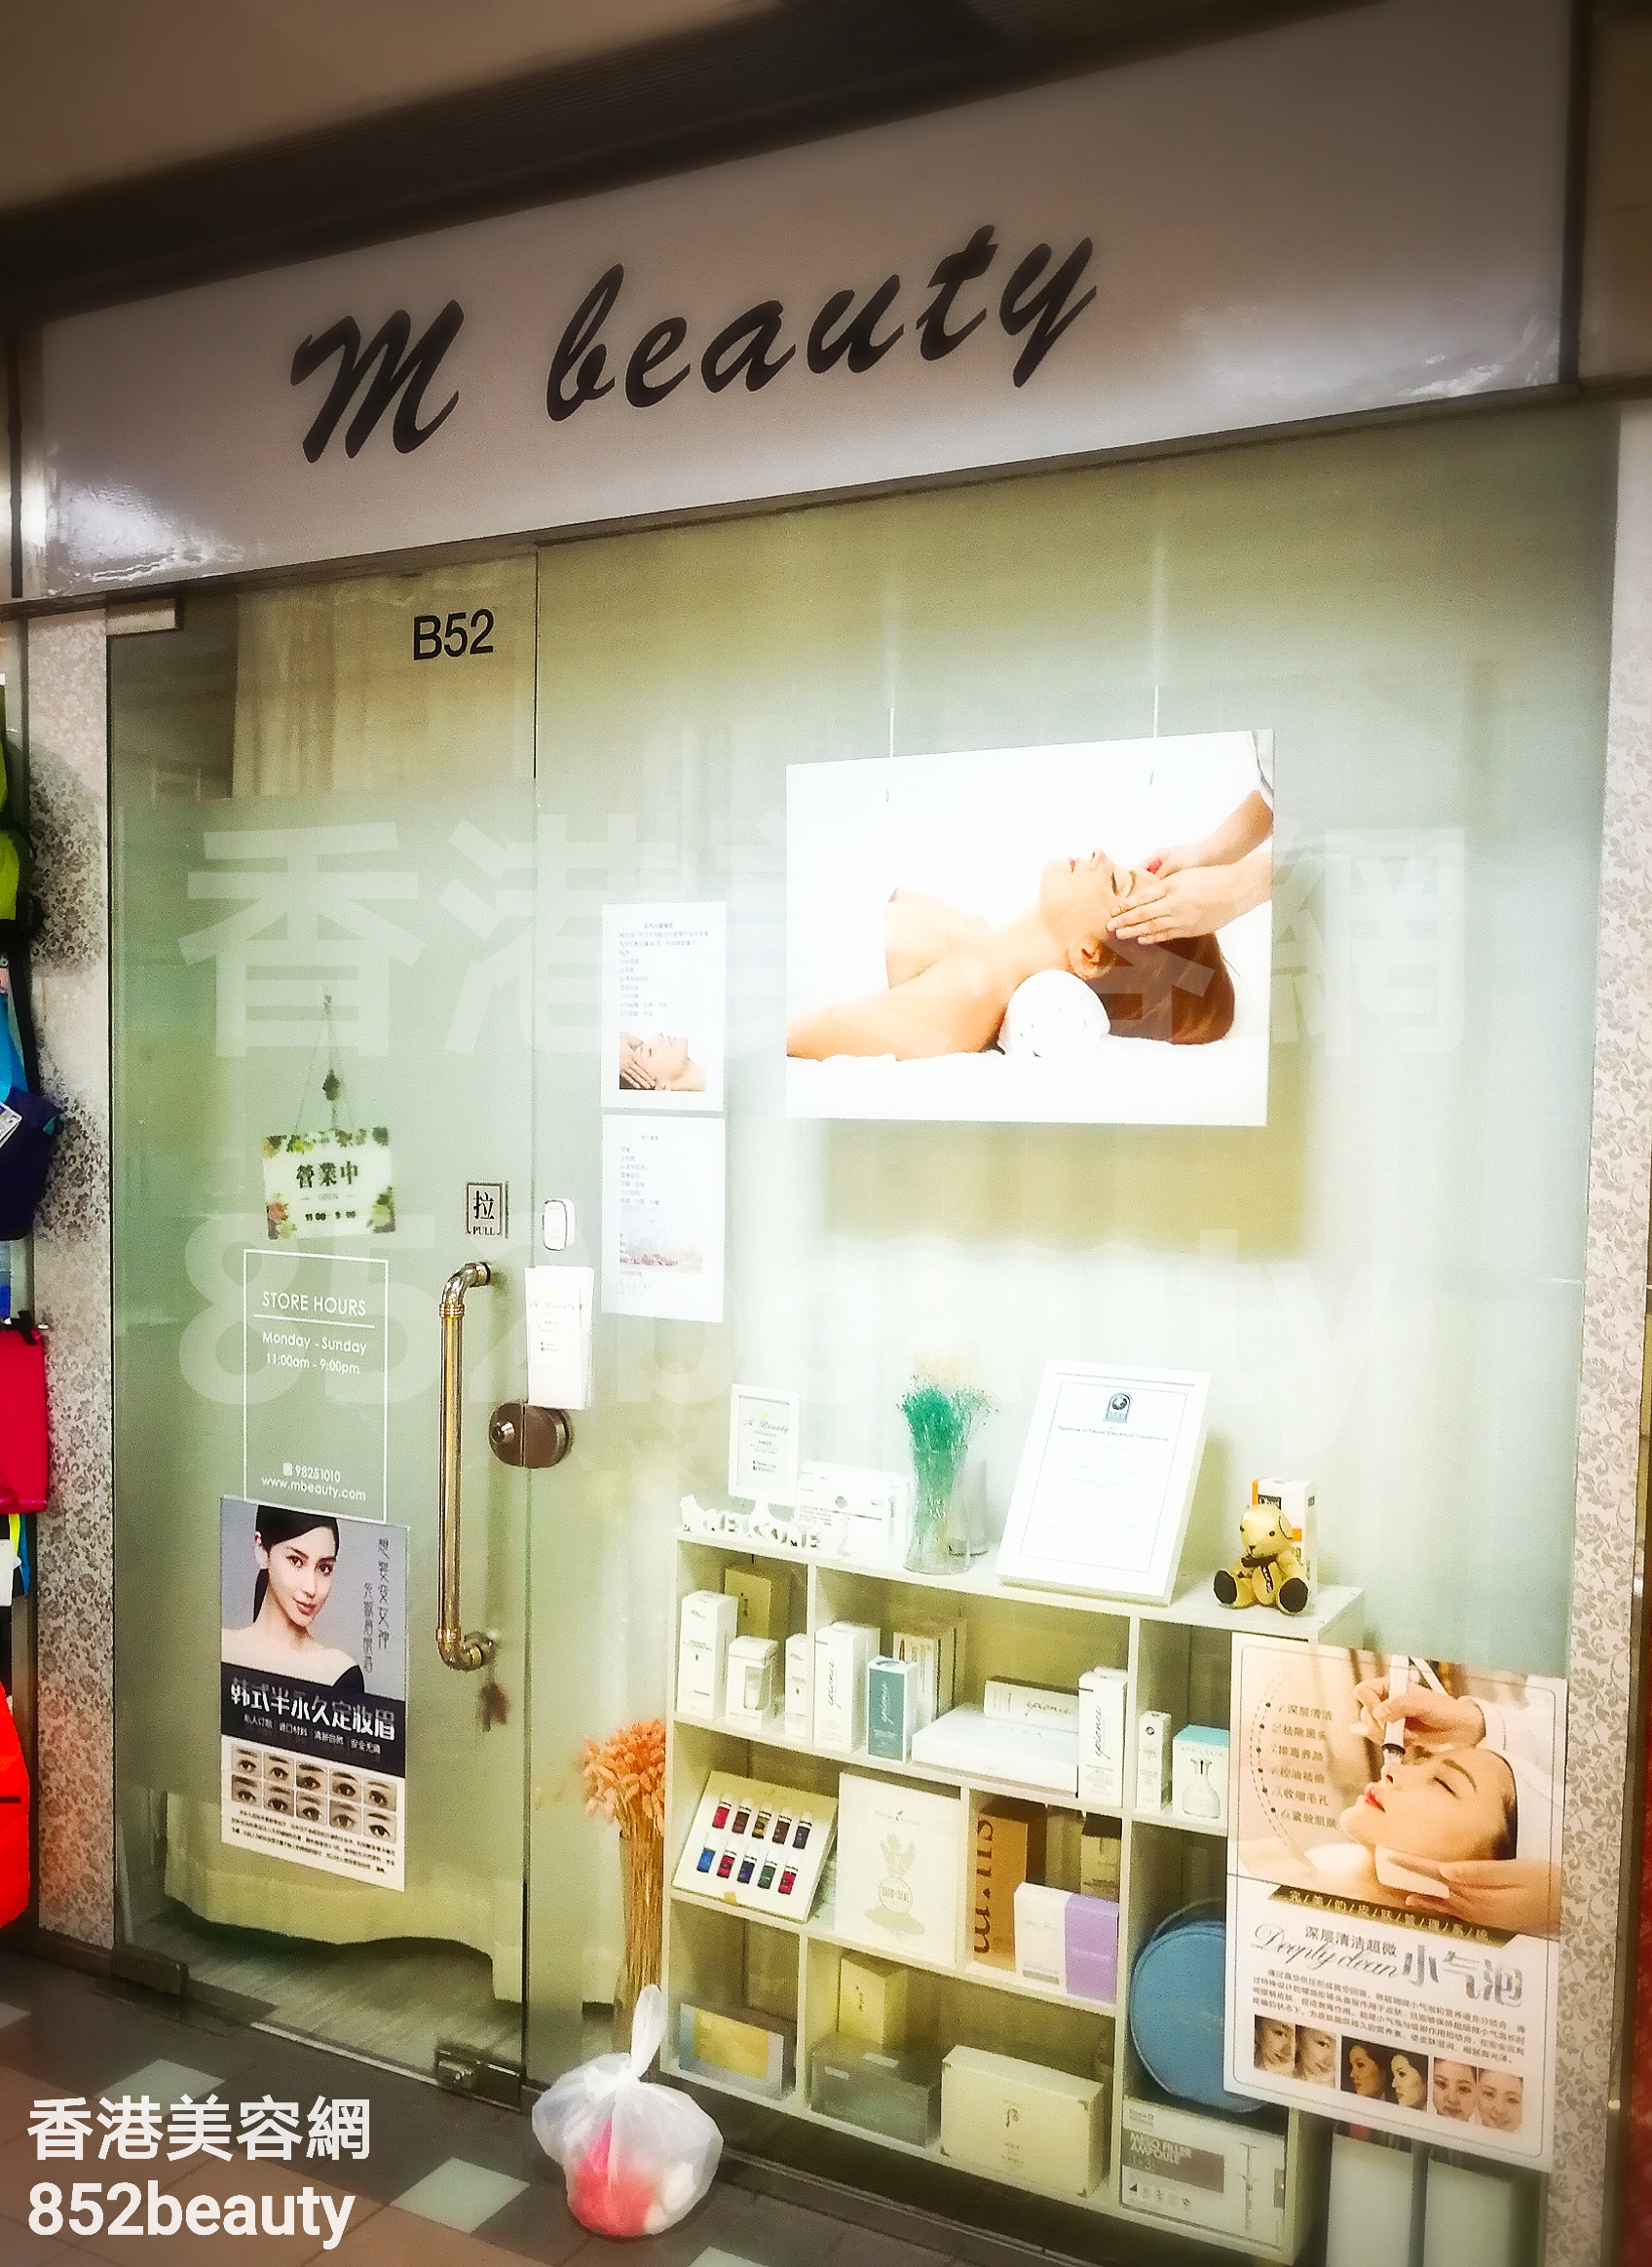 Hand and foot care: M Beauty